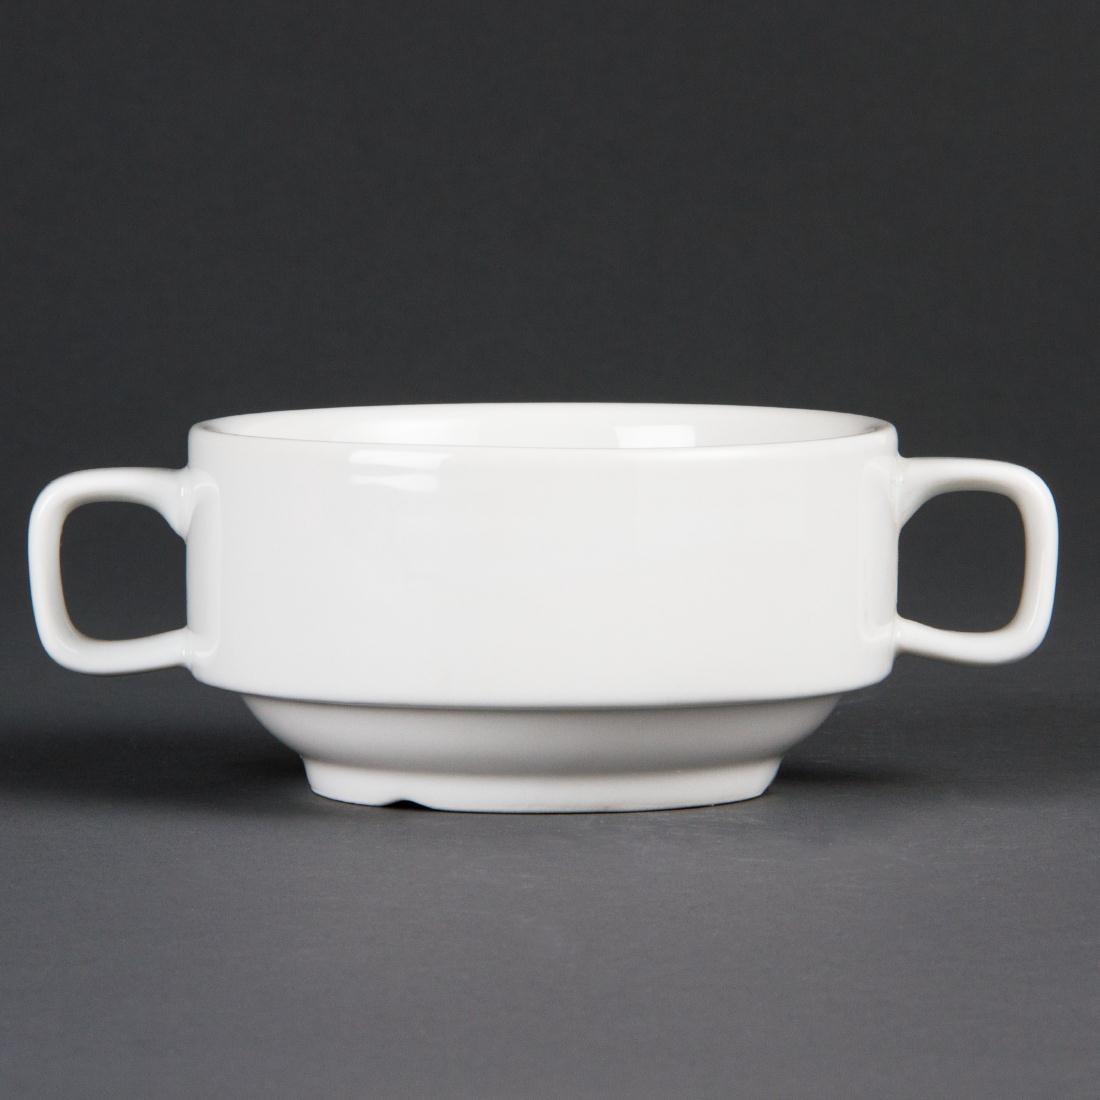 Olympia Whiteware Soup Bowls With Handles 400ml 14oz